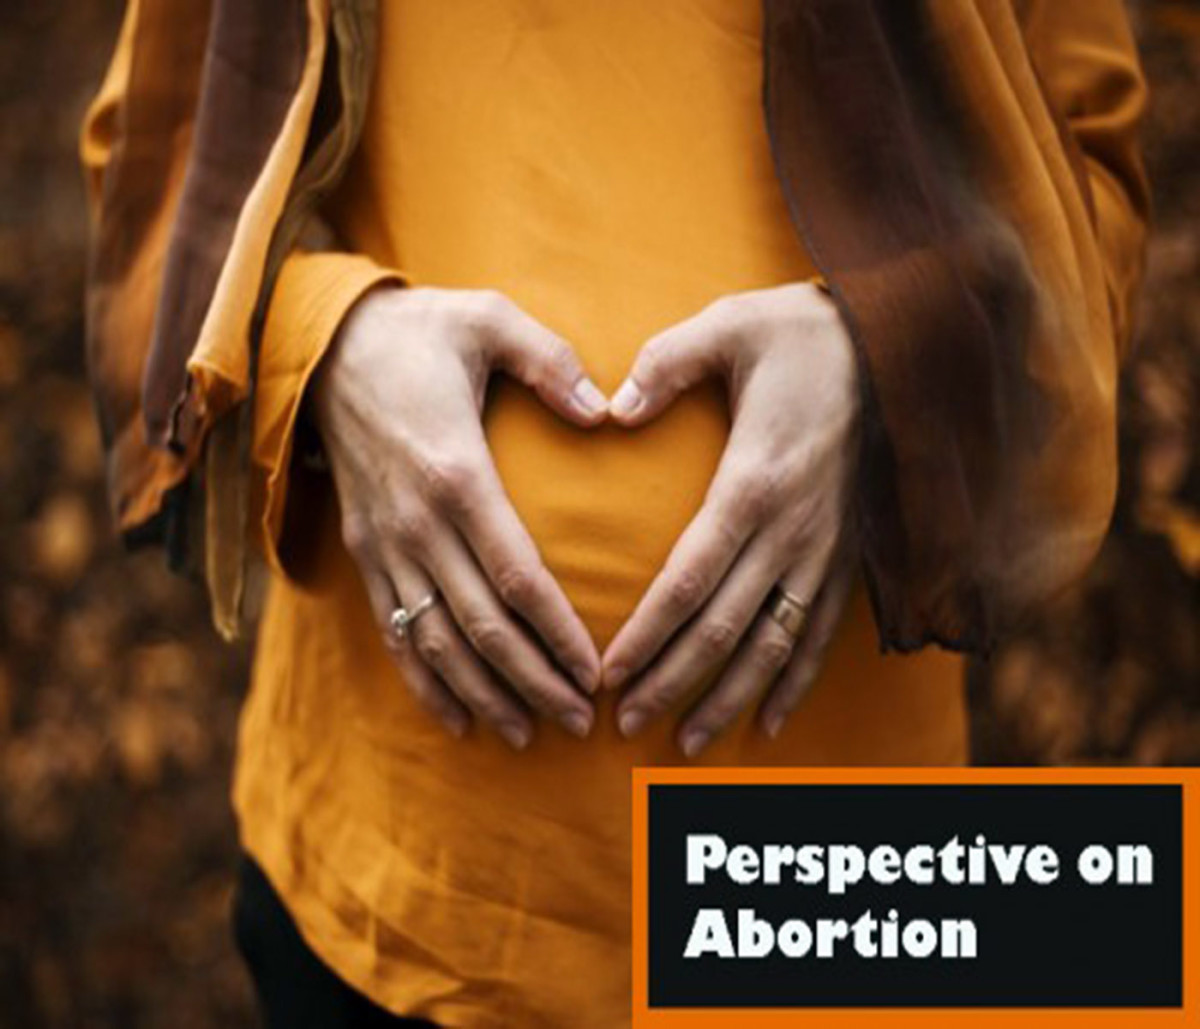  Perspective on Abortion